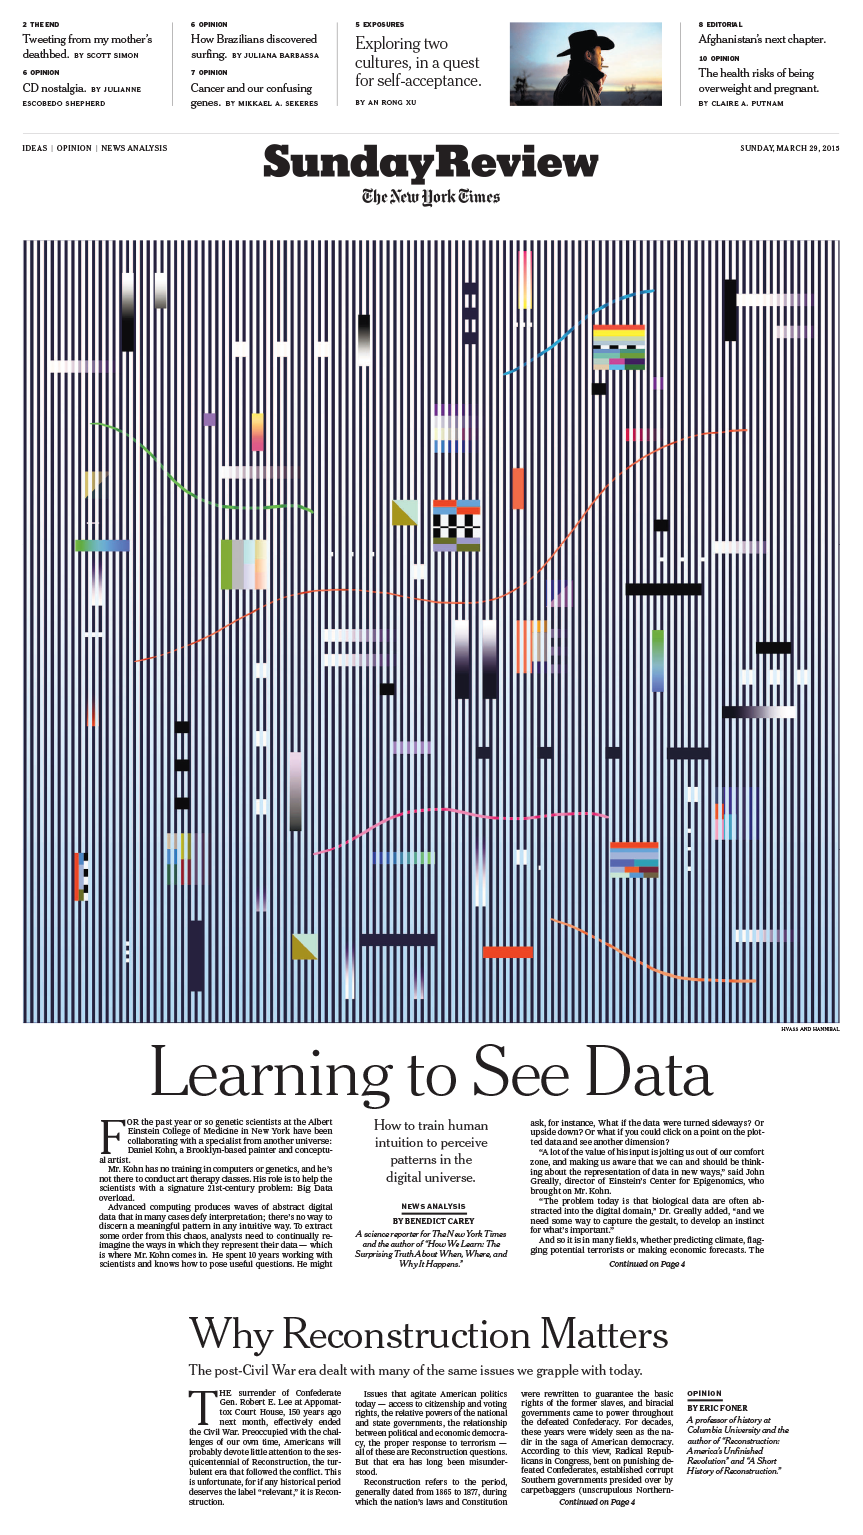 Sunday Review Cover: Learning To See Data